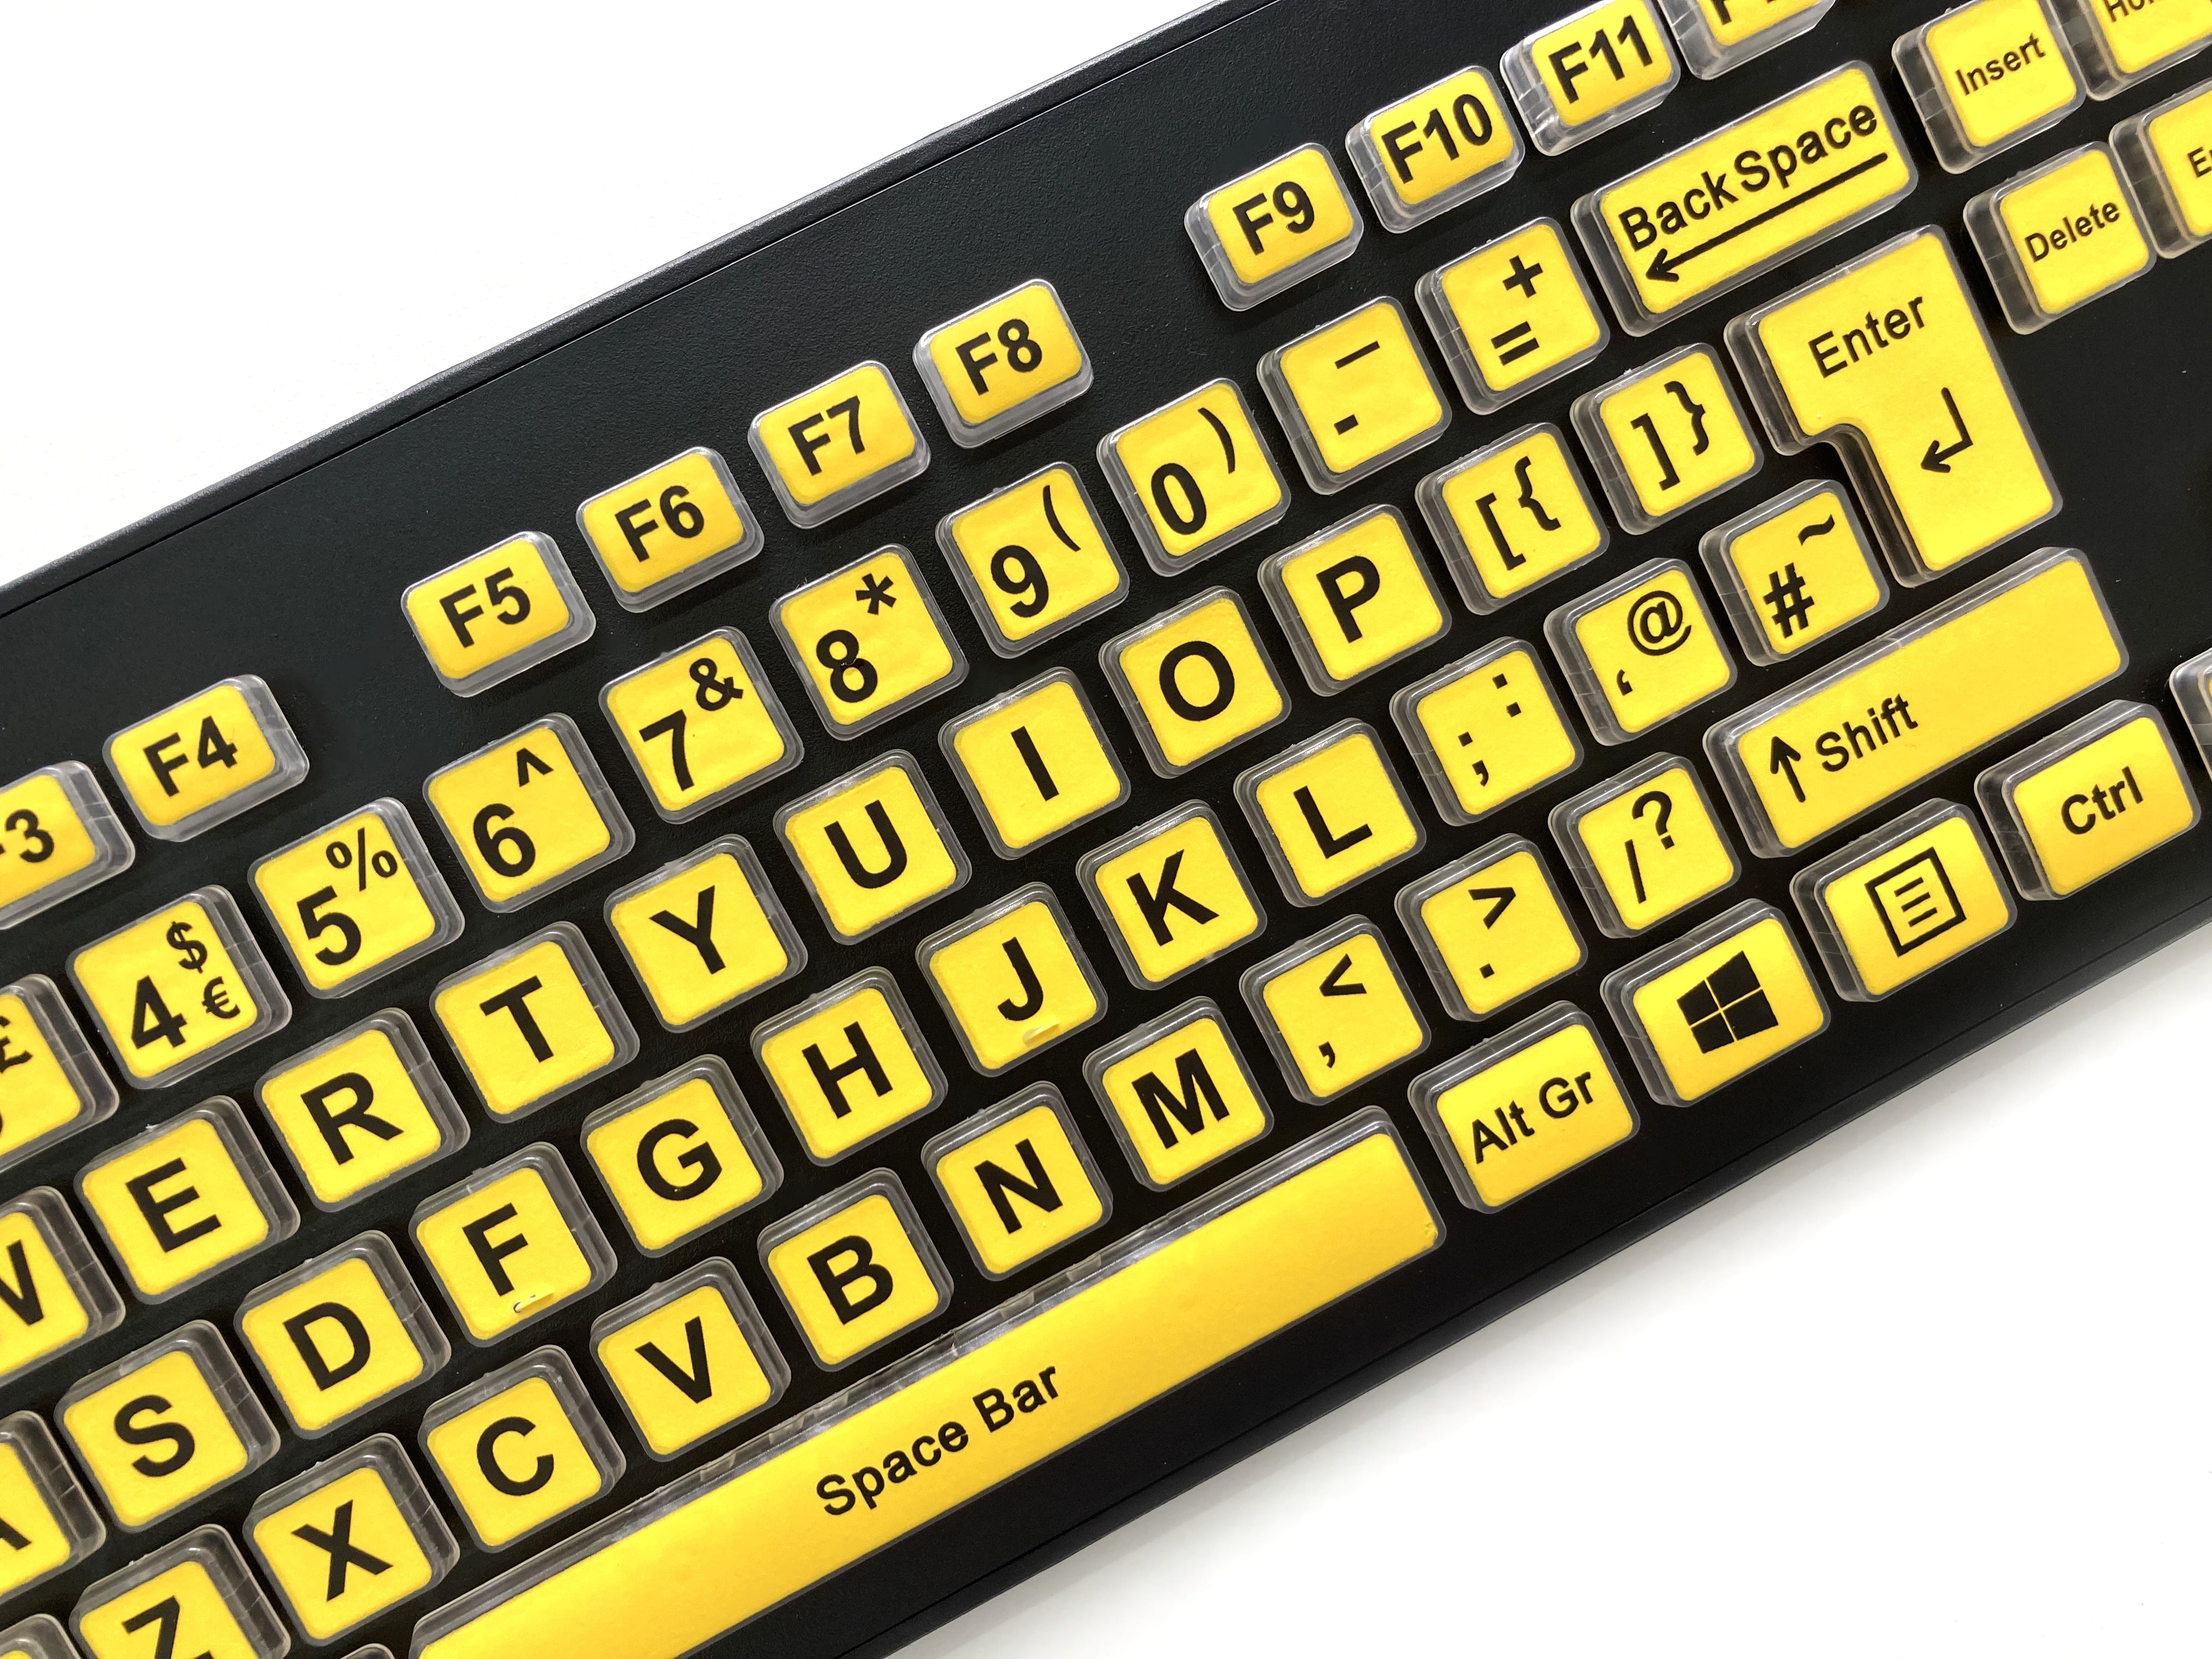 Accuratus Rainbow 2 High Vis - USB High Visibility Visual Impairment Keyboard with Extra Large Black Font & Yellow Keys